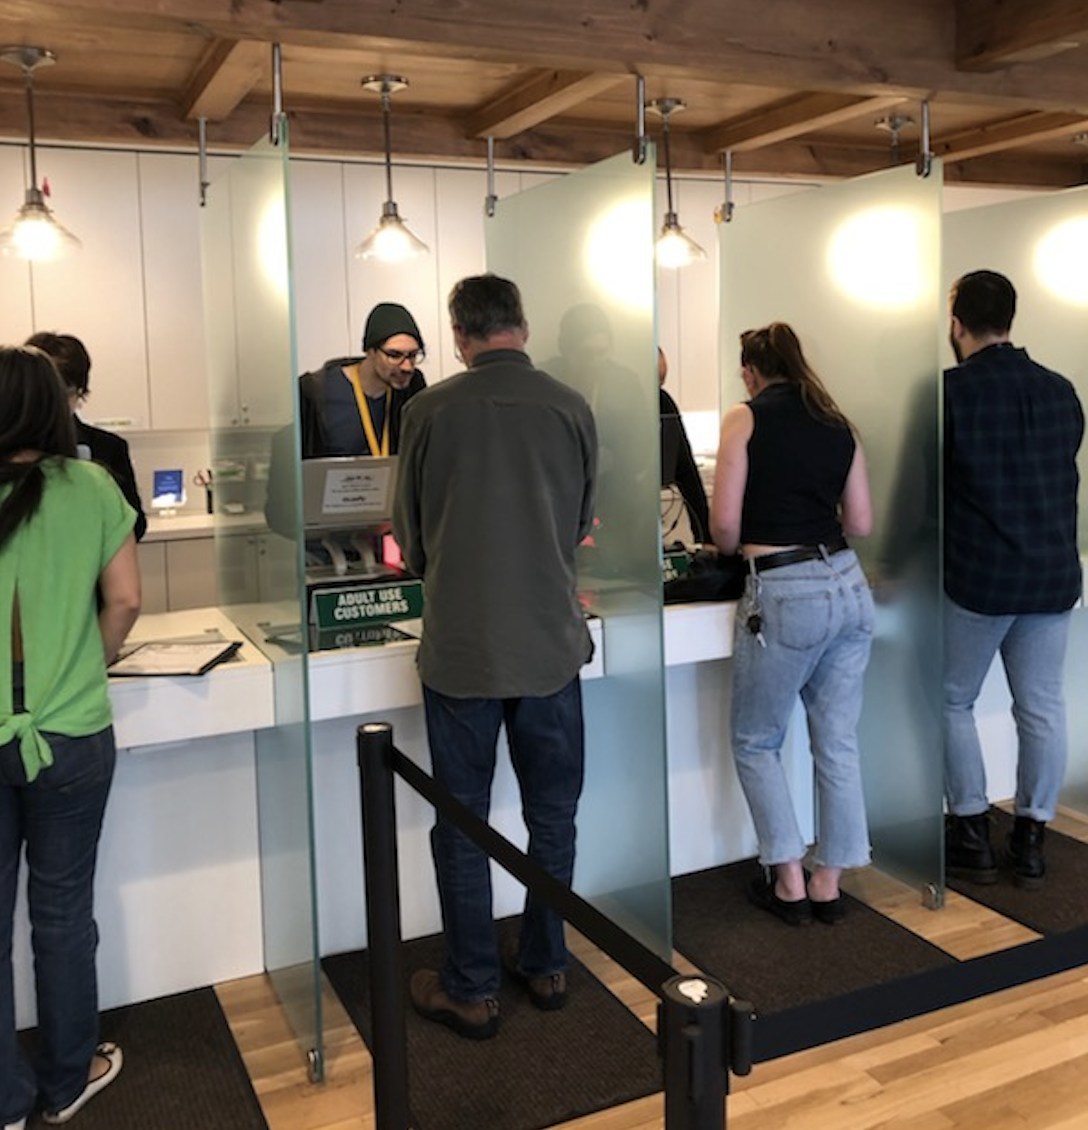 Garden Remedies Newton Opened Today For Adult Use Cannabis Sales